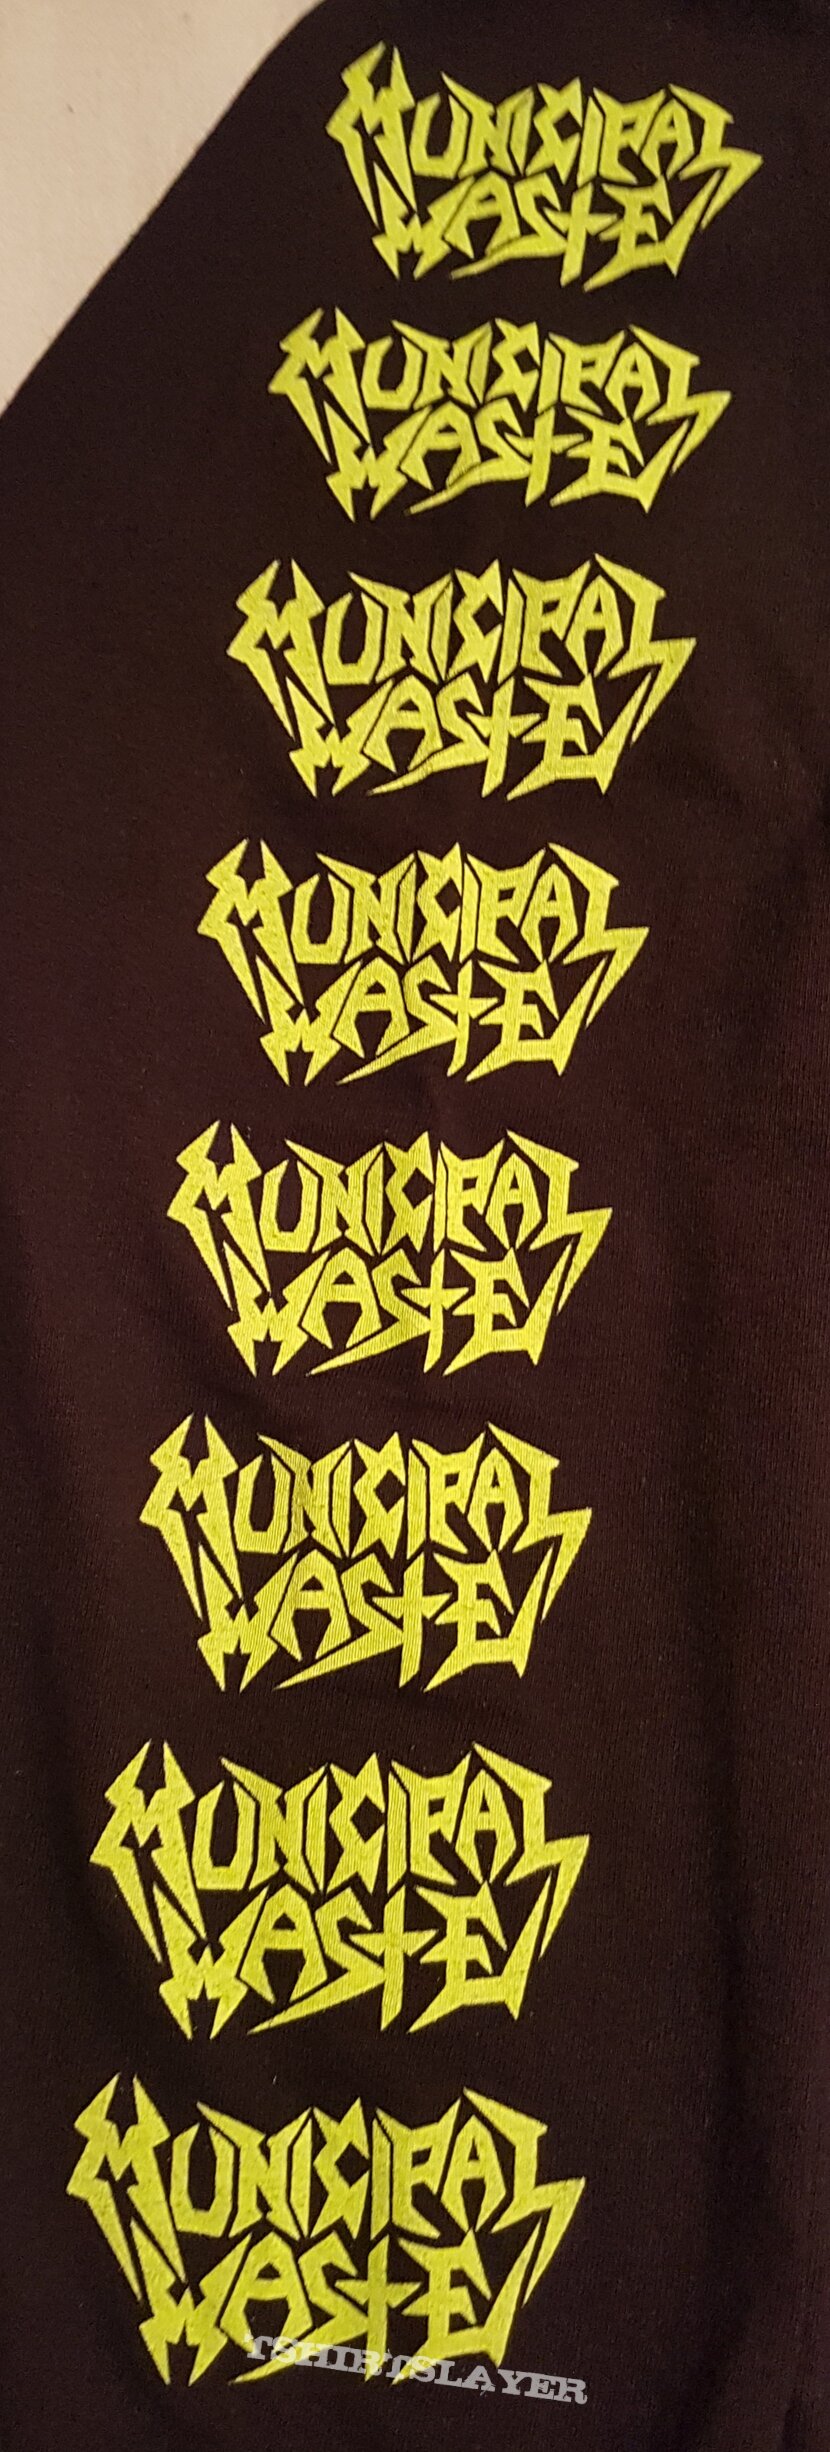 Municipal Waste The art of partying 